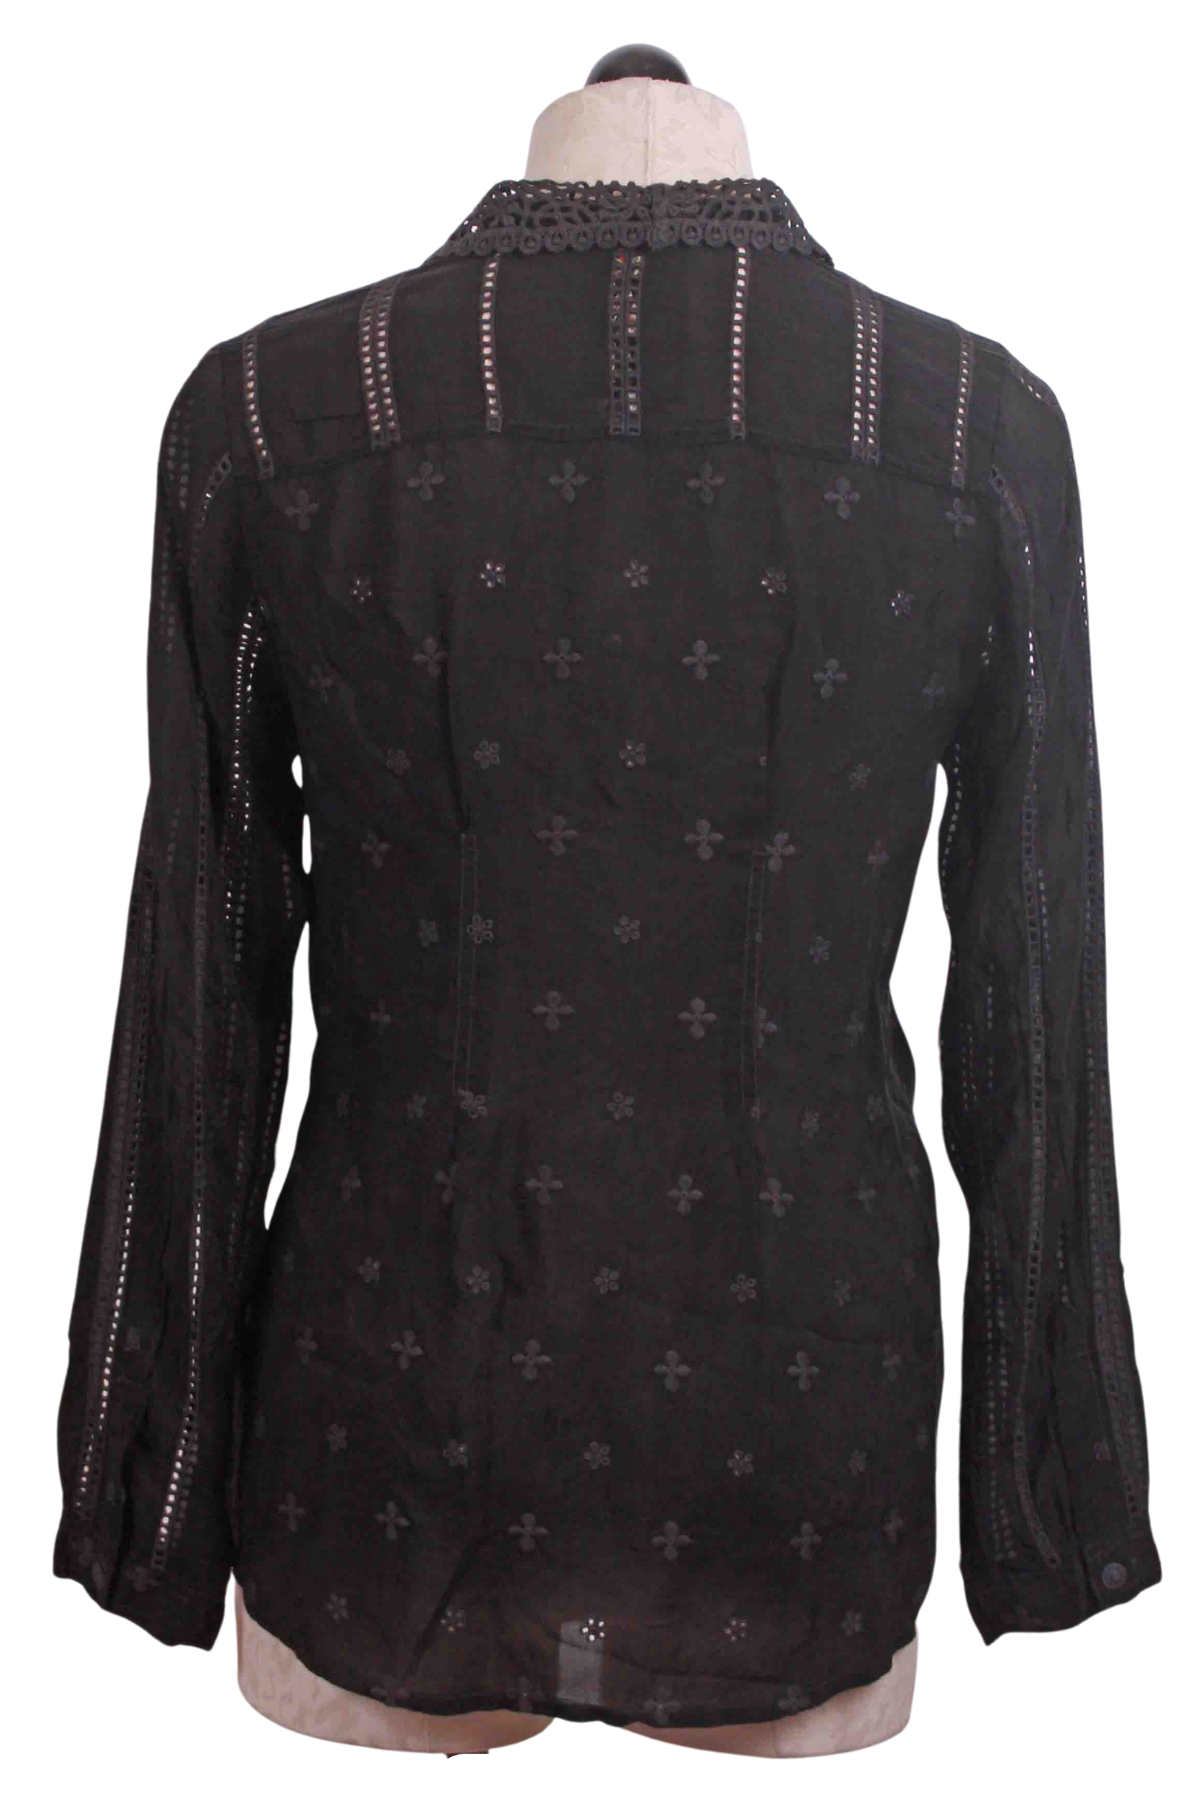 back view of Black Celia Applique Shirt by Johnny Was